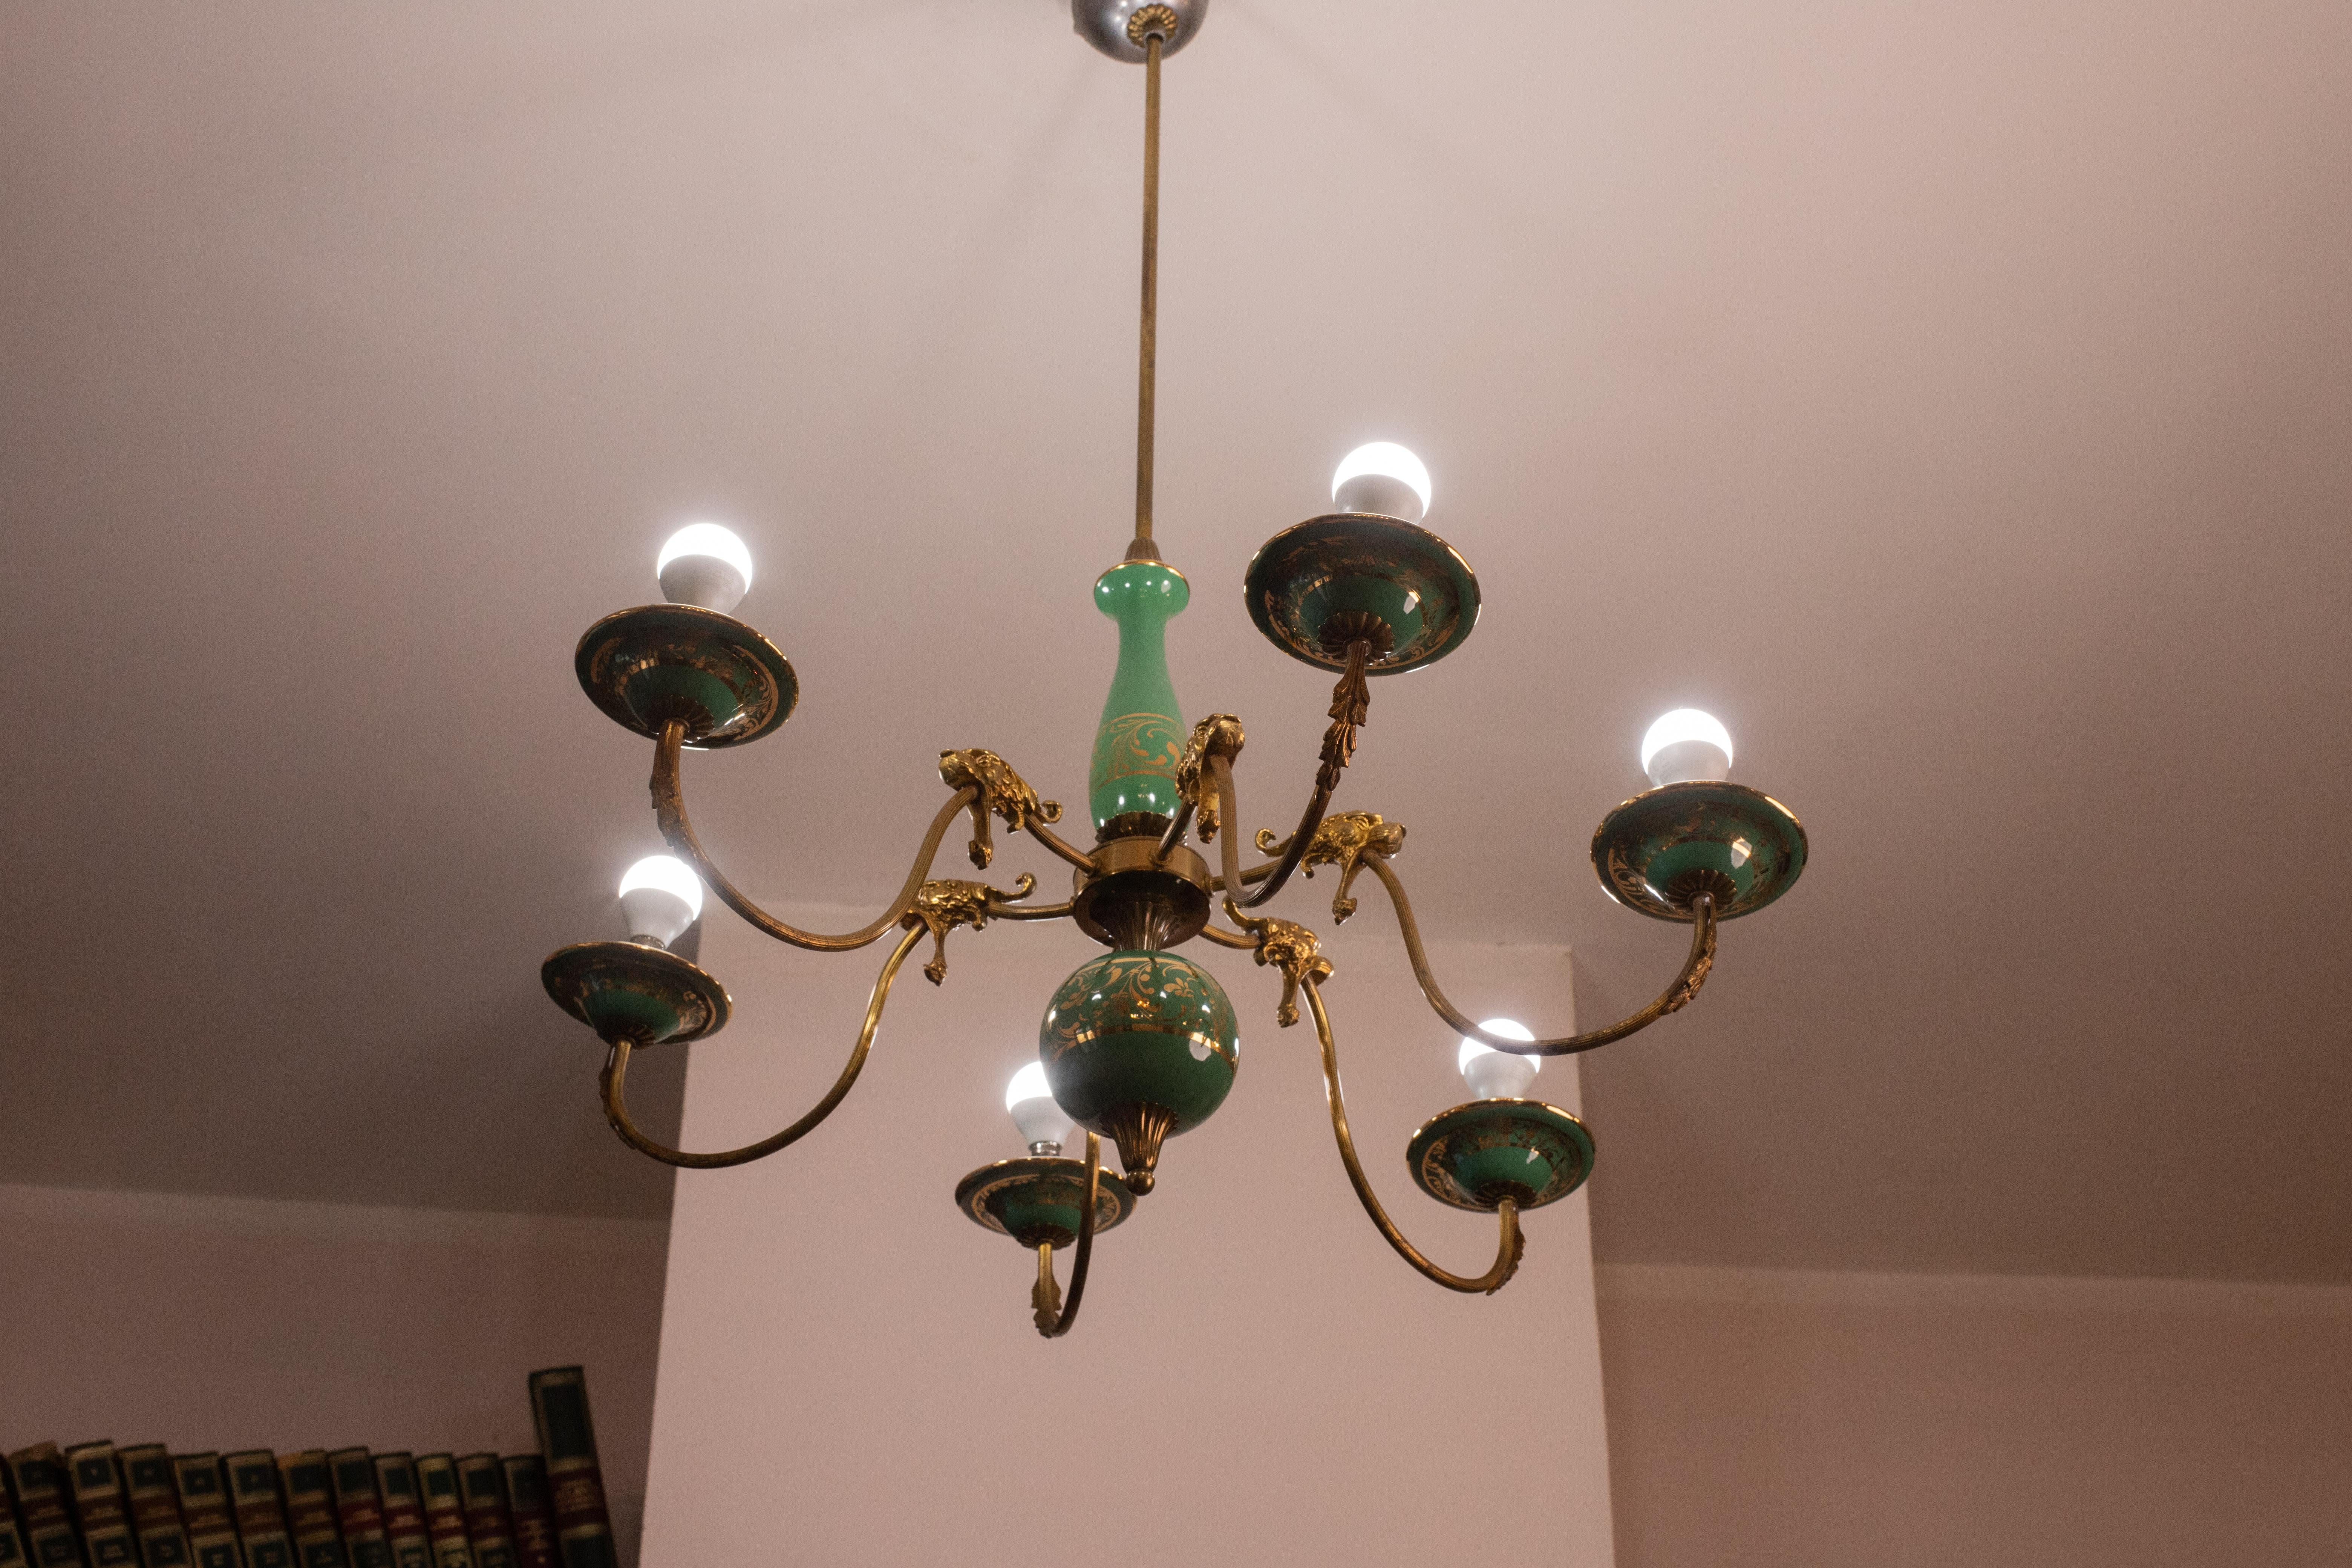 Stunning Art Deco chandelier made of brass and painted terracotta with decorations.

Each arm of the chandelier is ornamented with friezes refiguring lions.

The 6 light points mount a European standard e 14 socket.

All elements of the